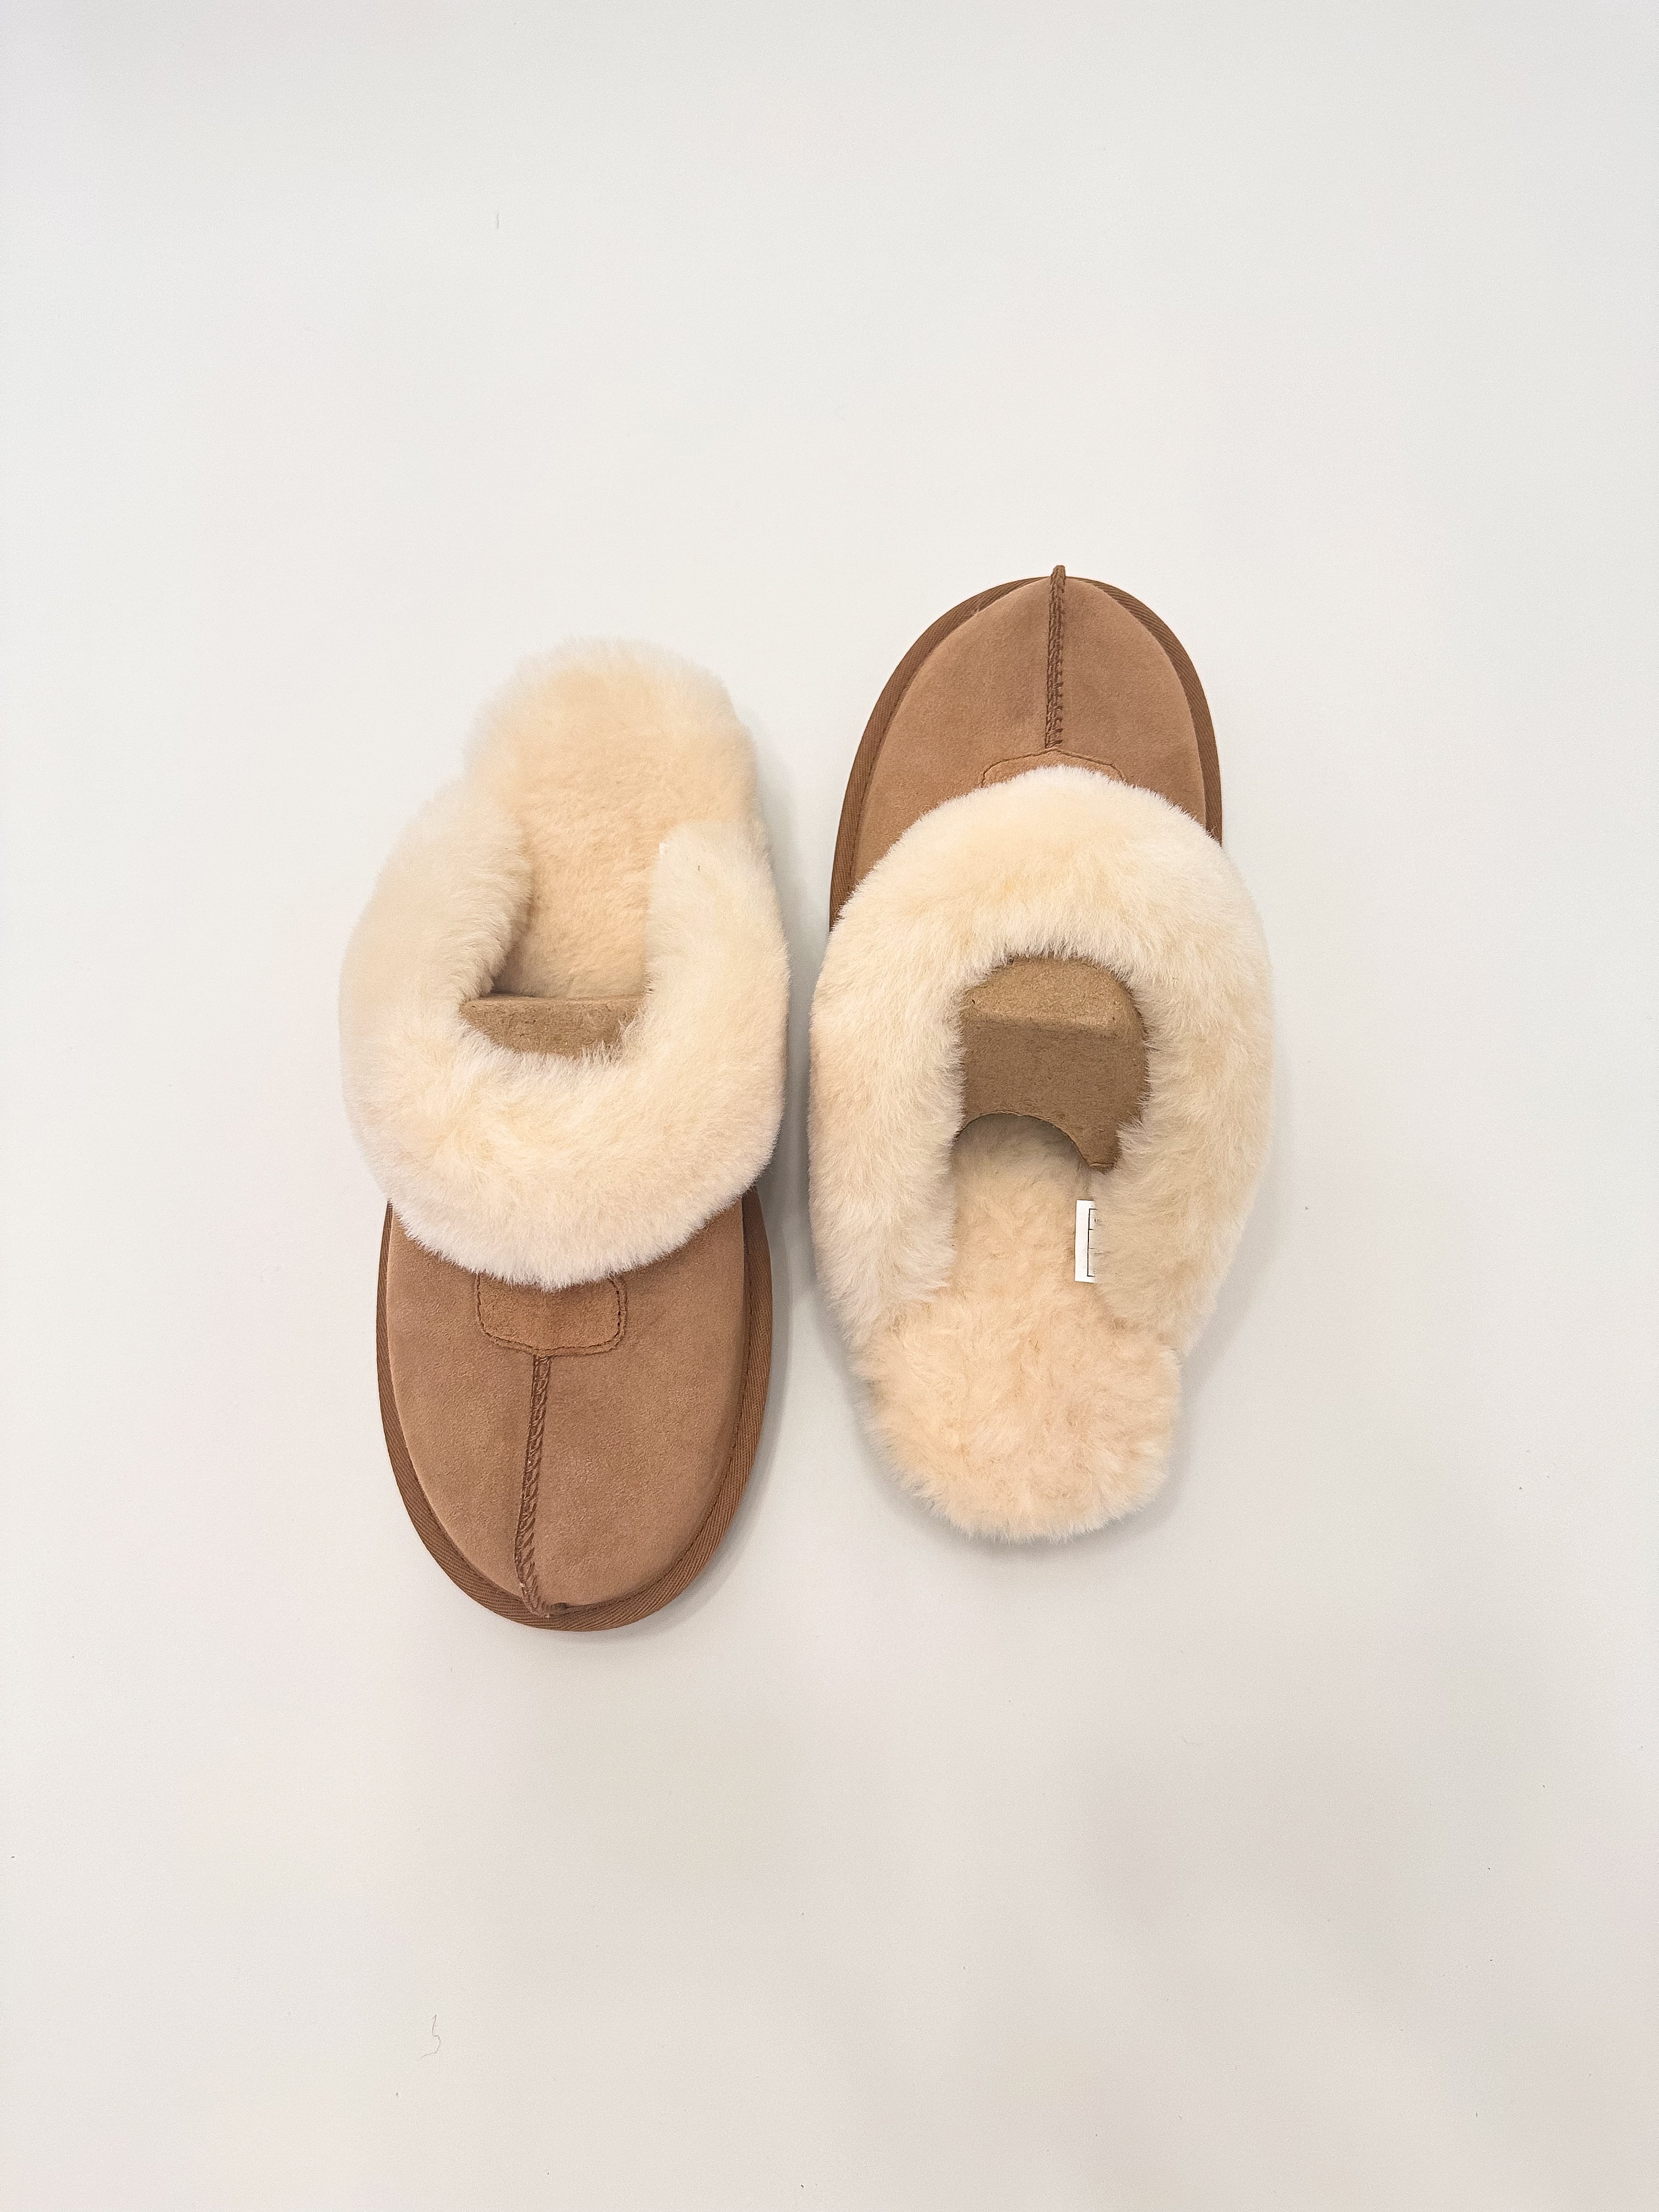 The Fuzzies Slippers